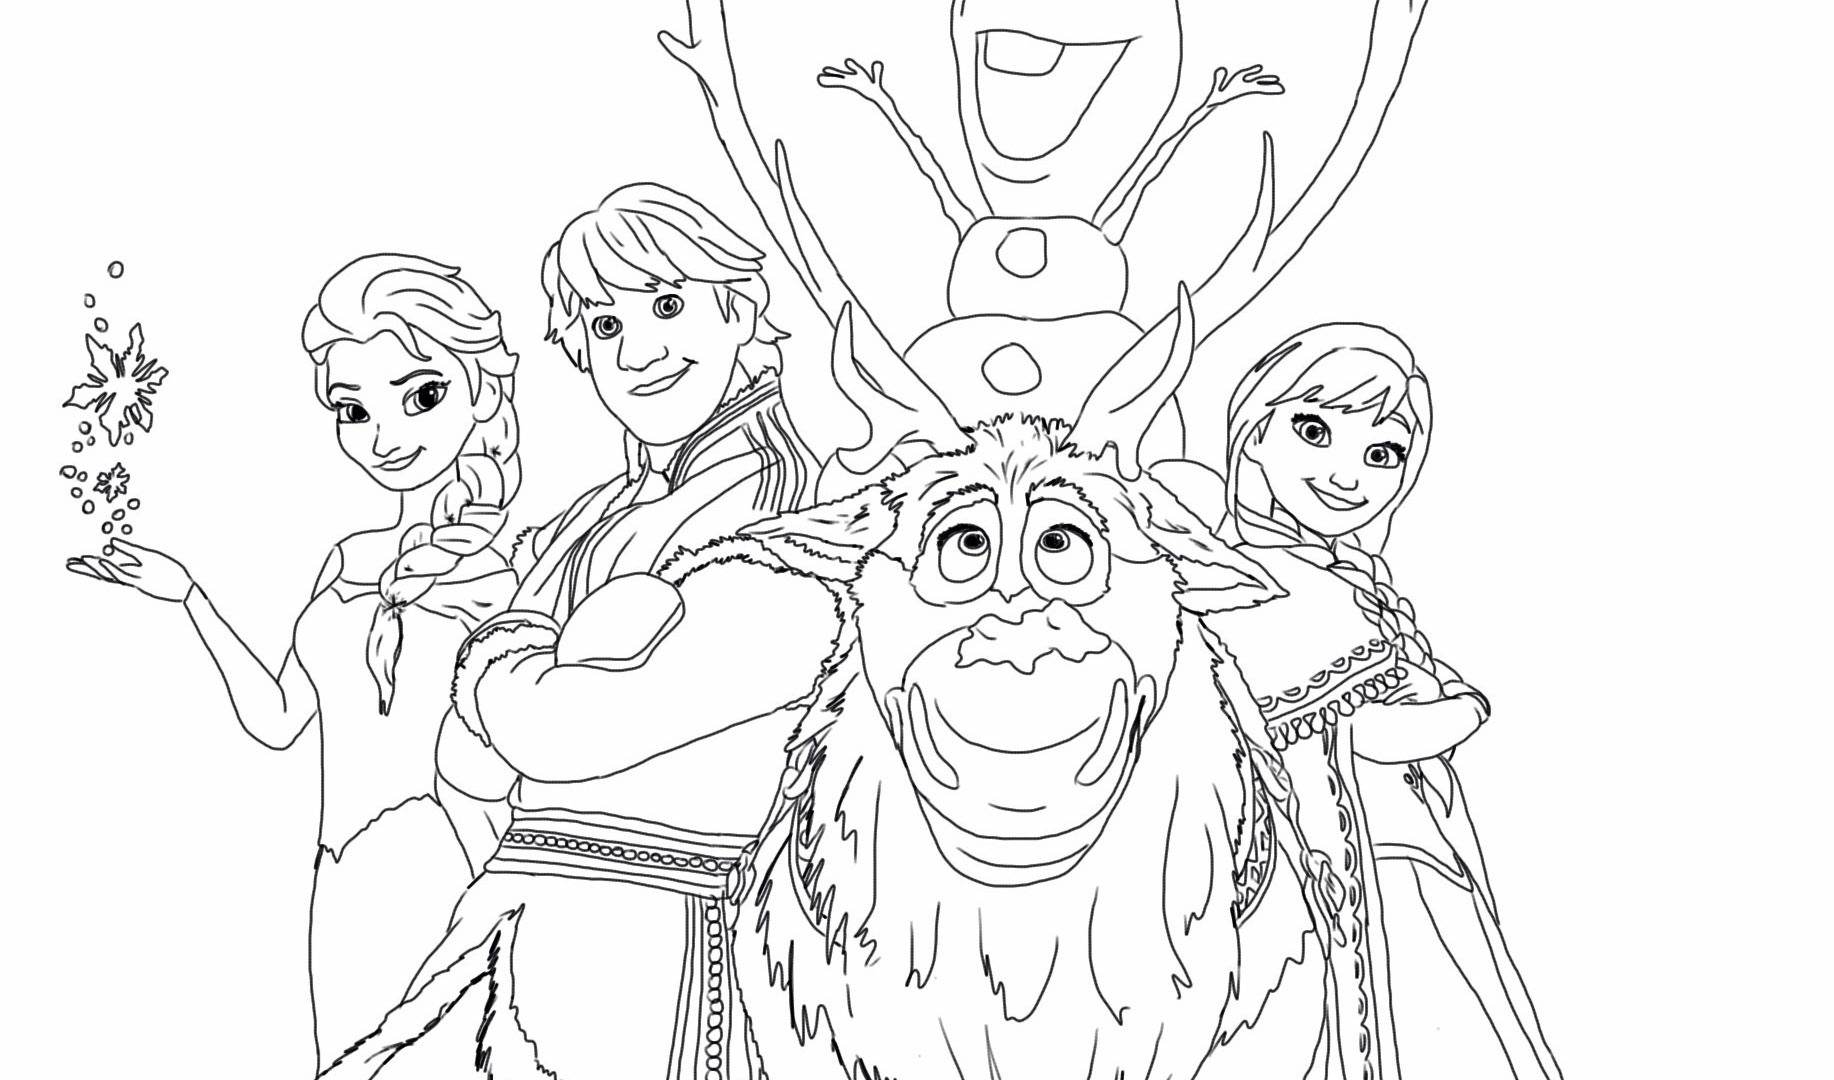 Coloring Ideas : Printable Frozen Coloring Pages O Olaf Ideas Cool - Free Printable Frozen Coloring Pages